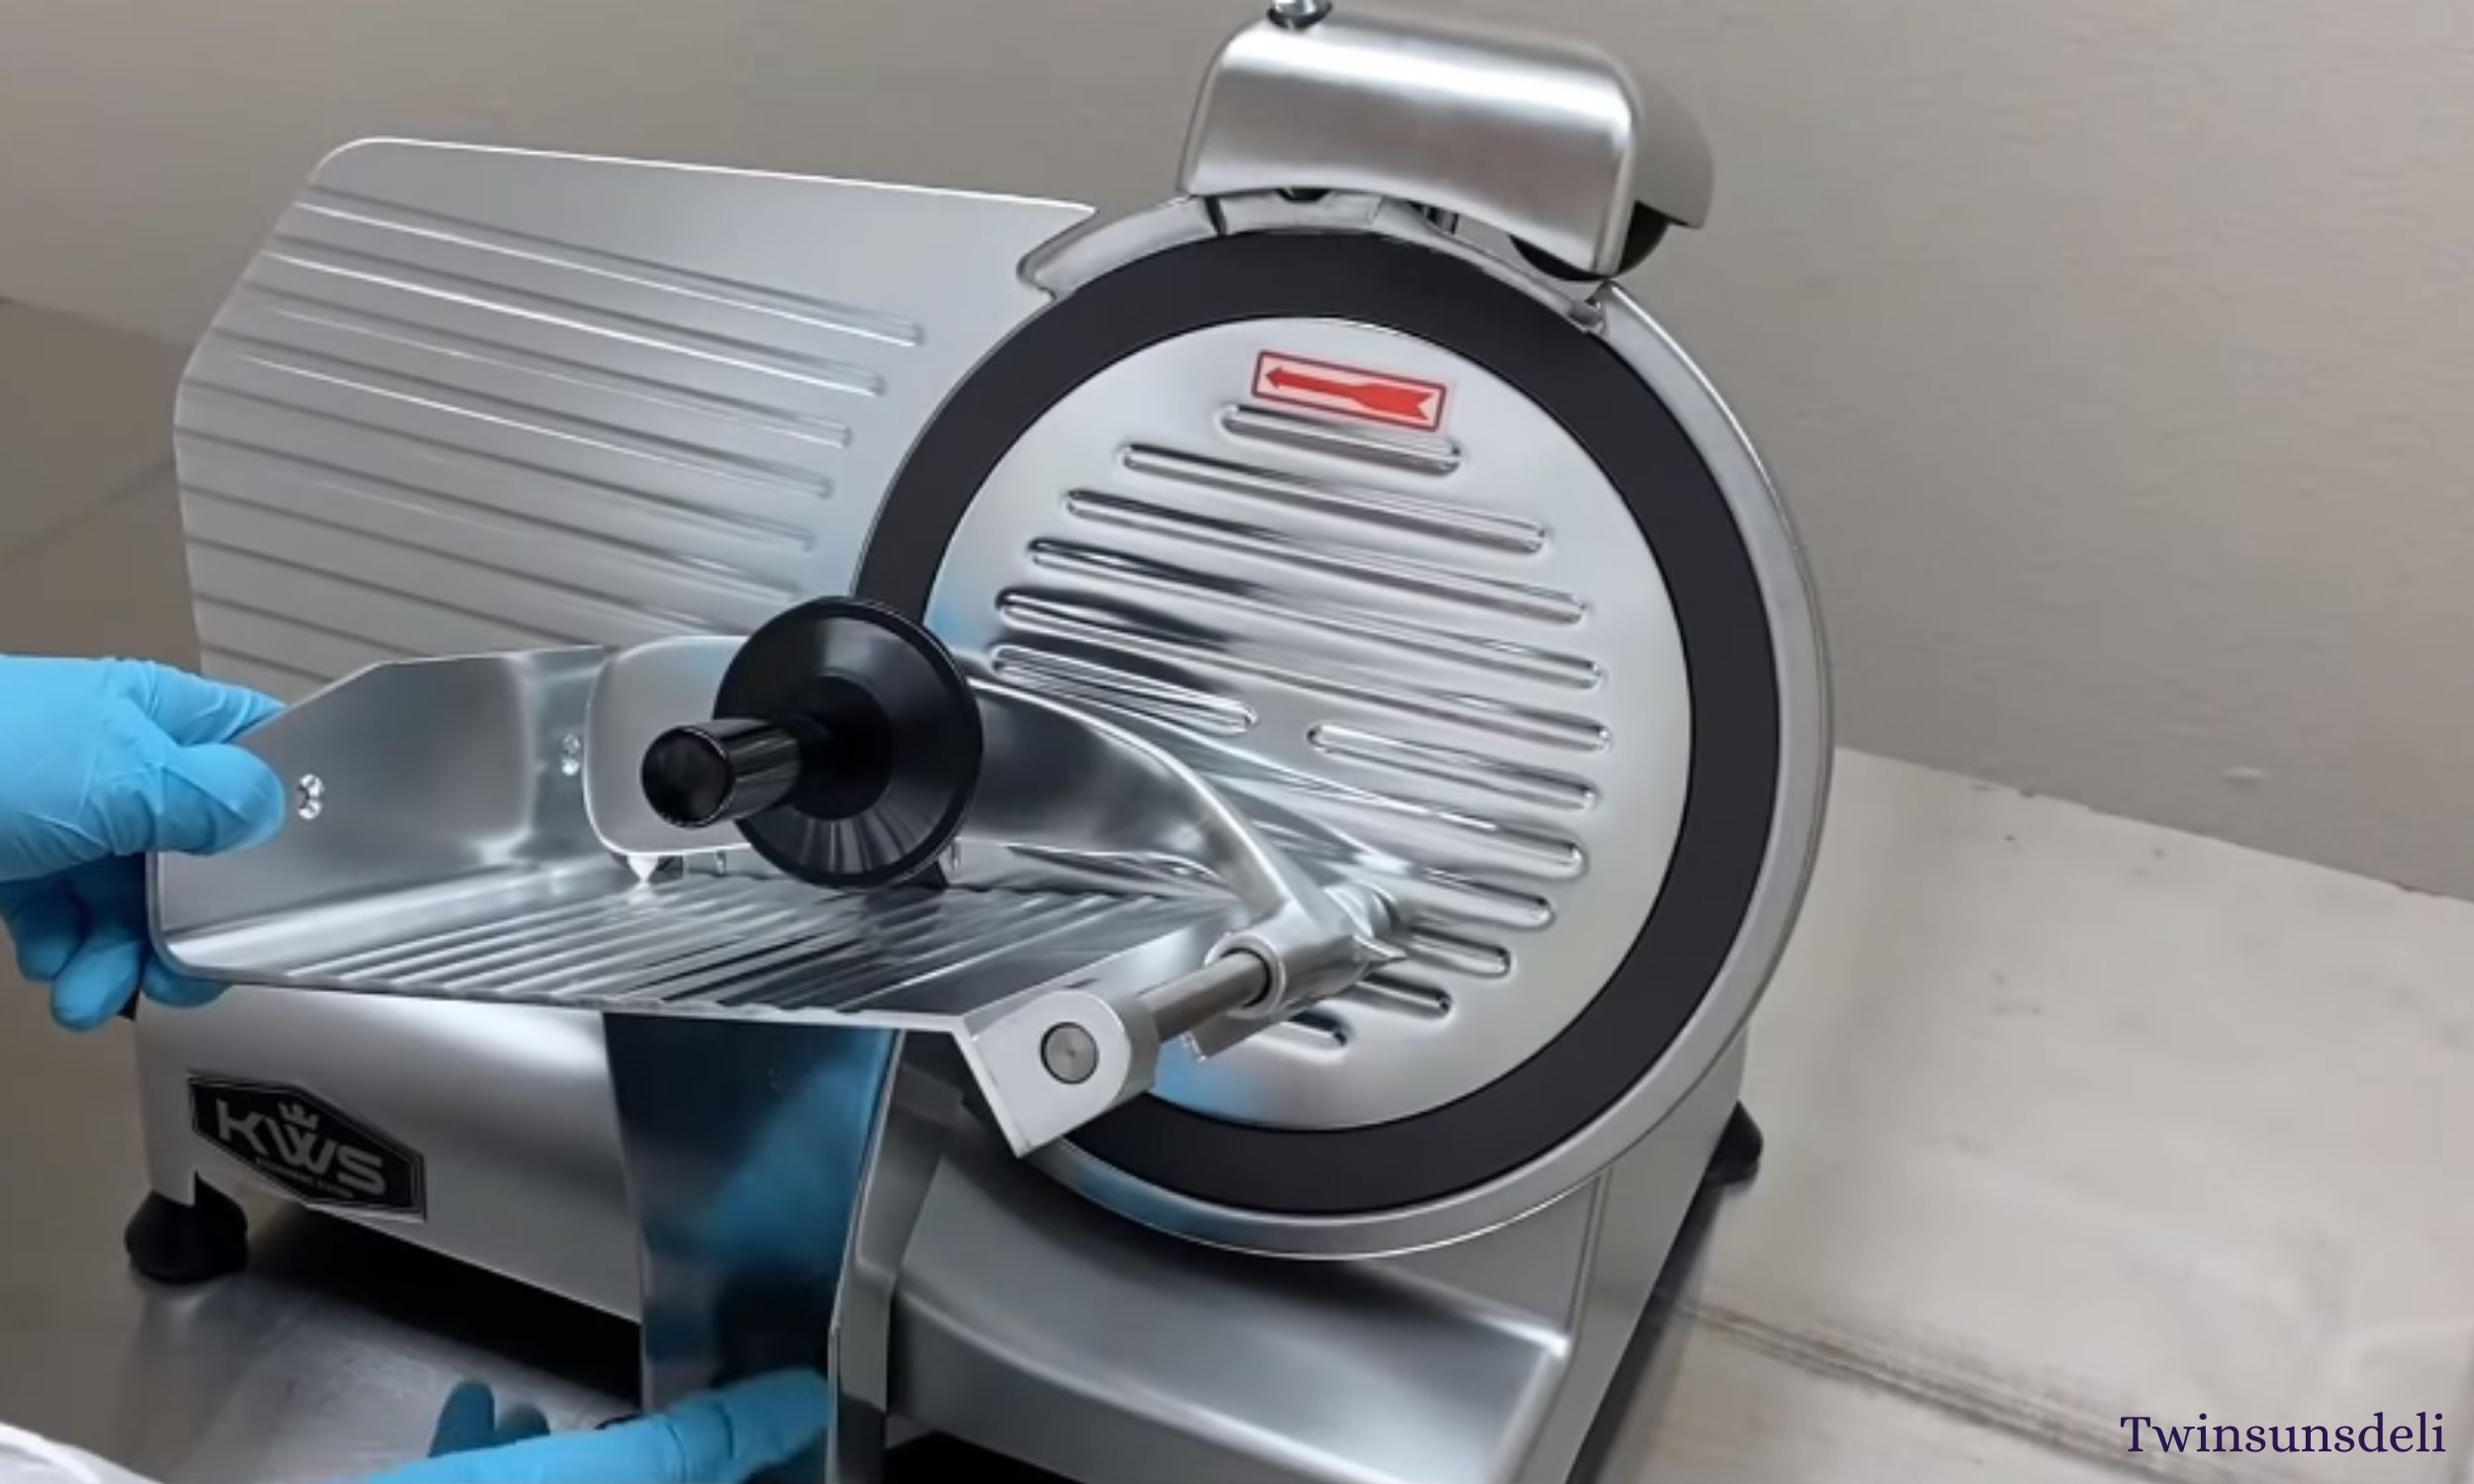 How to Clean a Meat Slicer